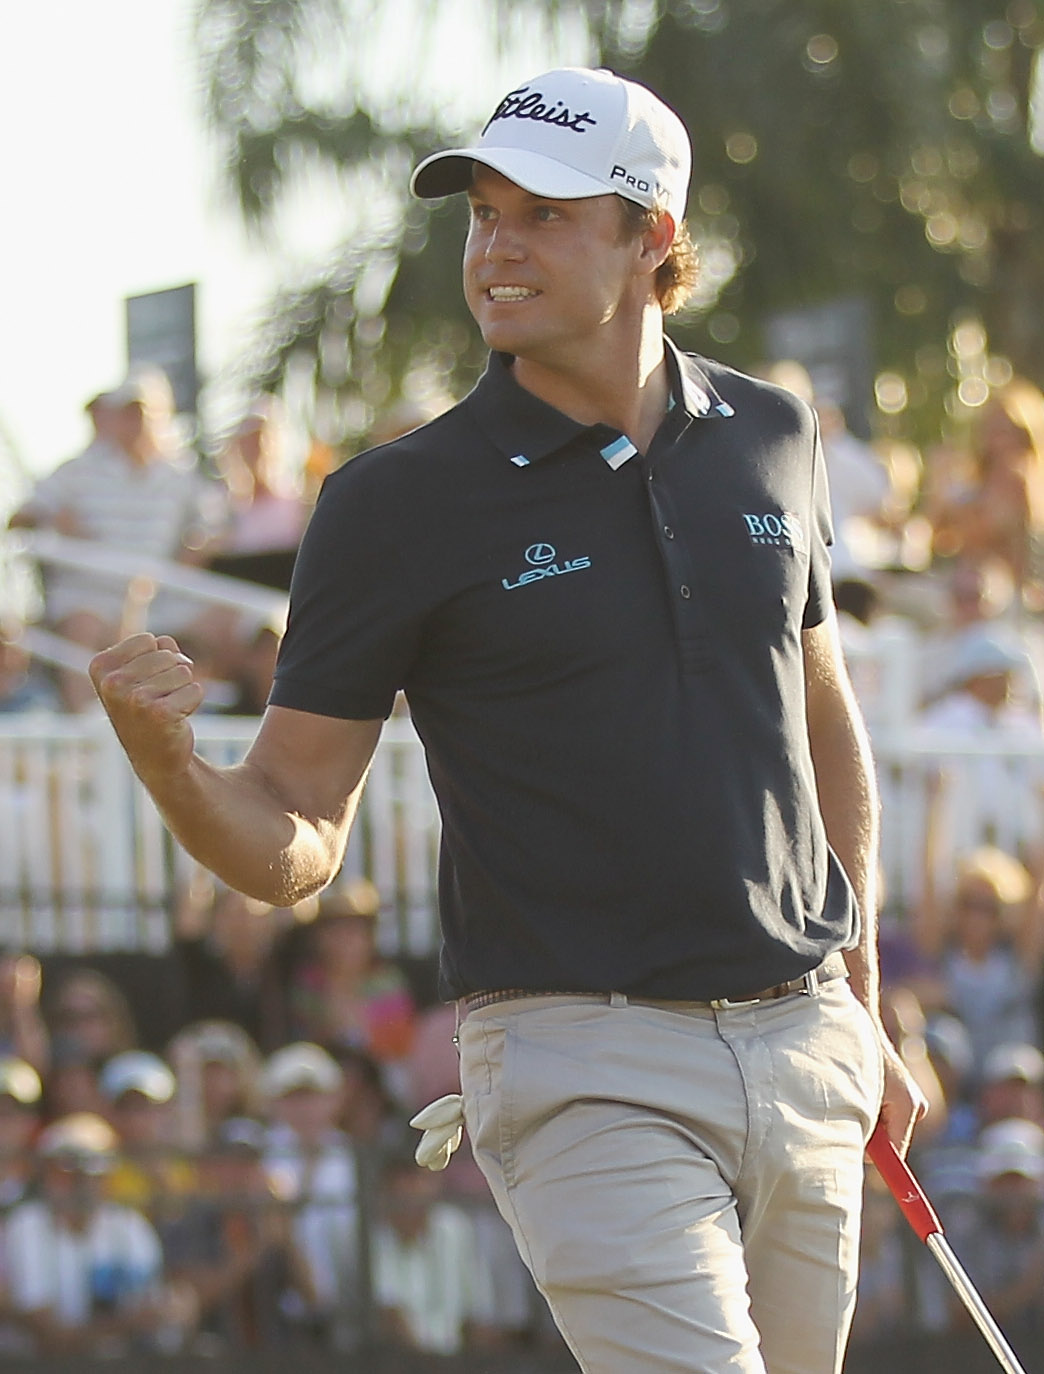 DORAL, FL - MARCH 13:  Nick Watney celebrates his birdie putt on the 18th green during the final round of the 2011 WGC- Cadillac Championship at the TPC Blue Monster at the Doral Golf Resort and Spa on March 13, 2011 in Doral, Florida.  (Photo by Mike Ehr